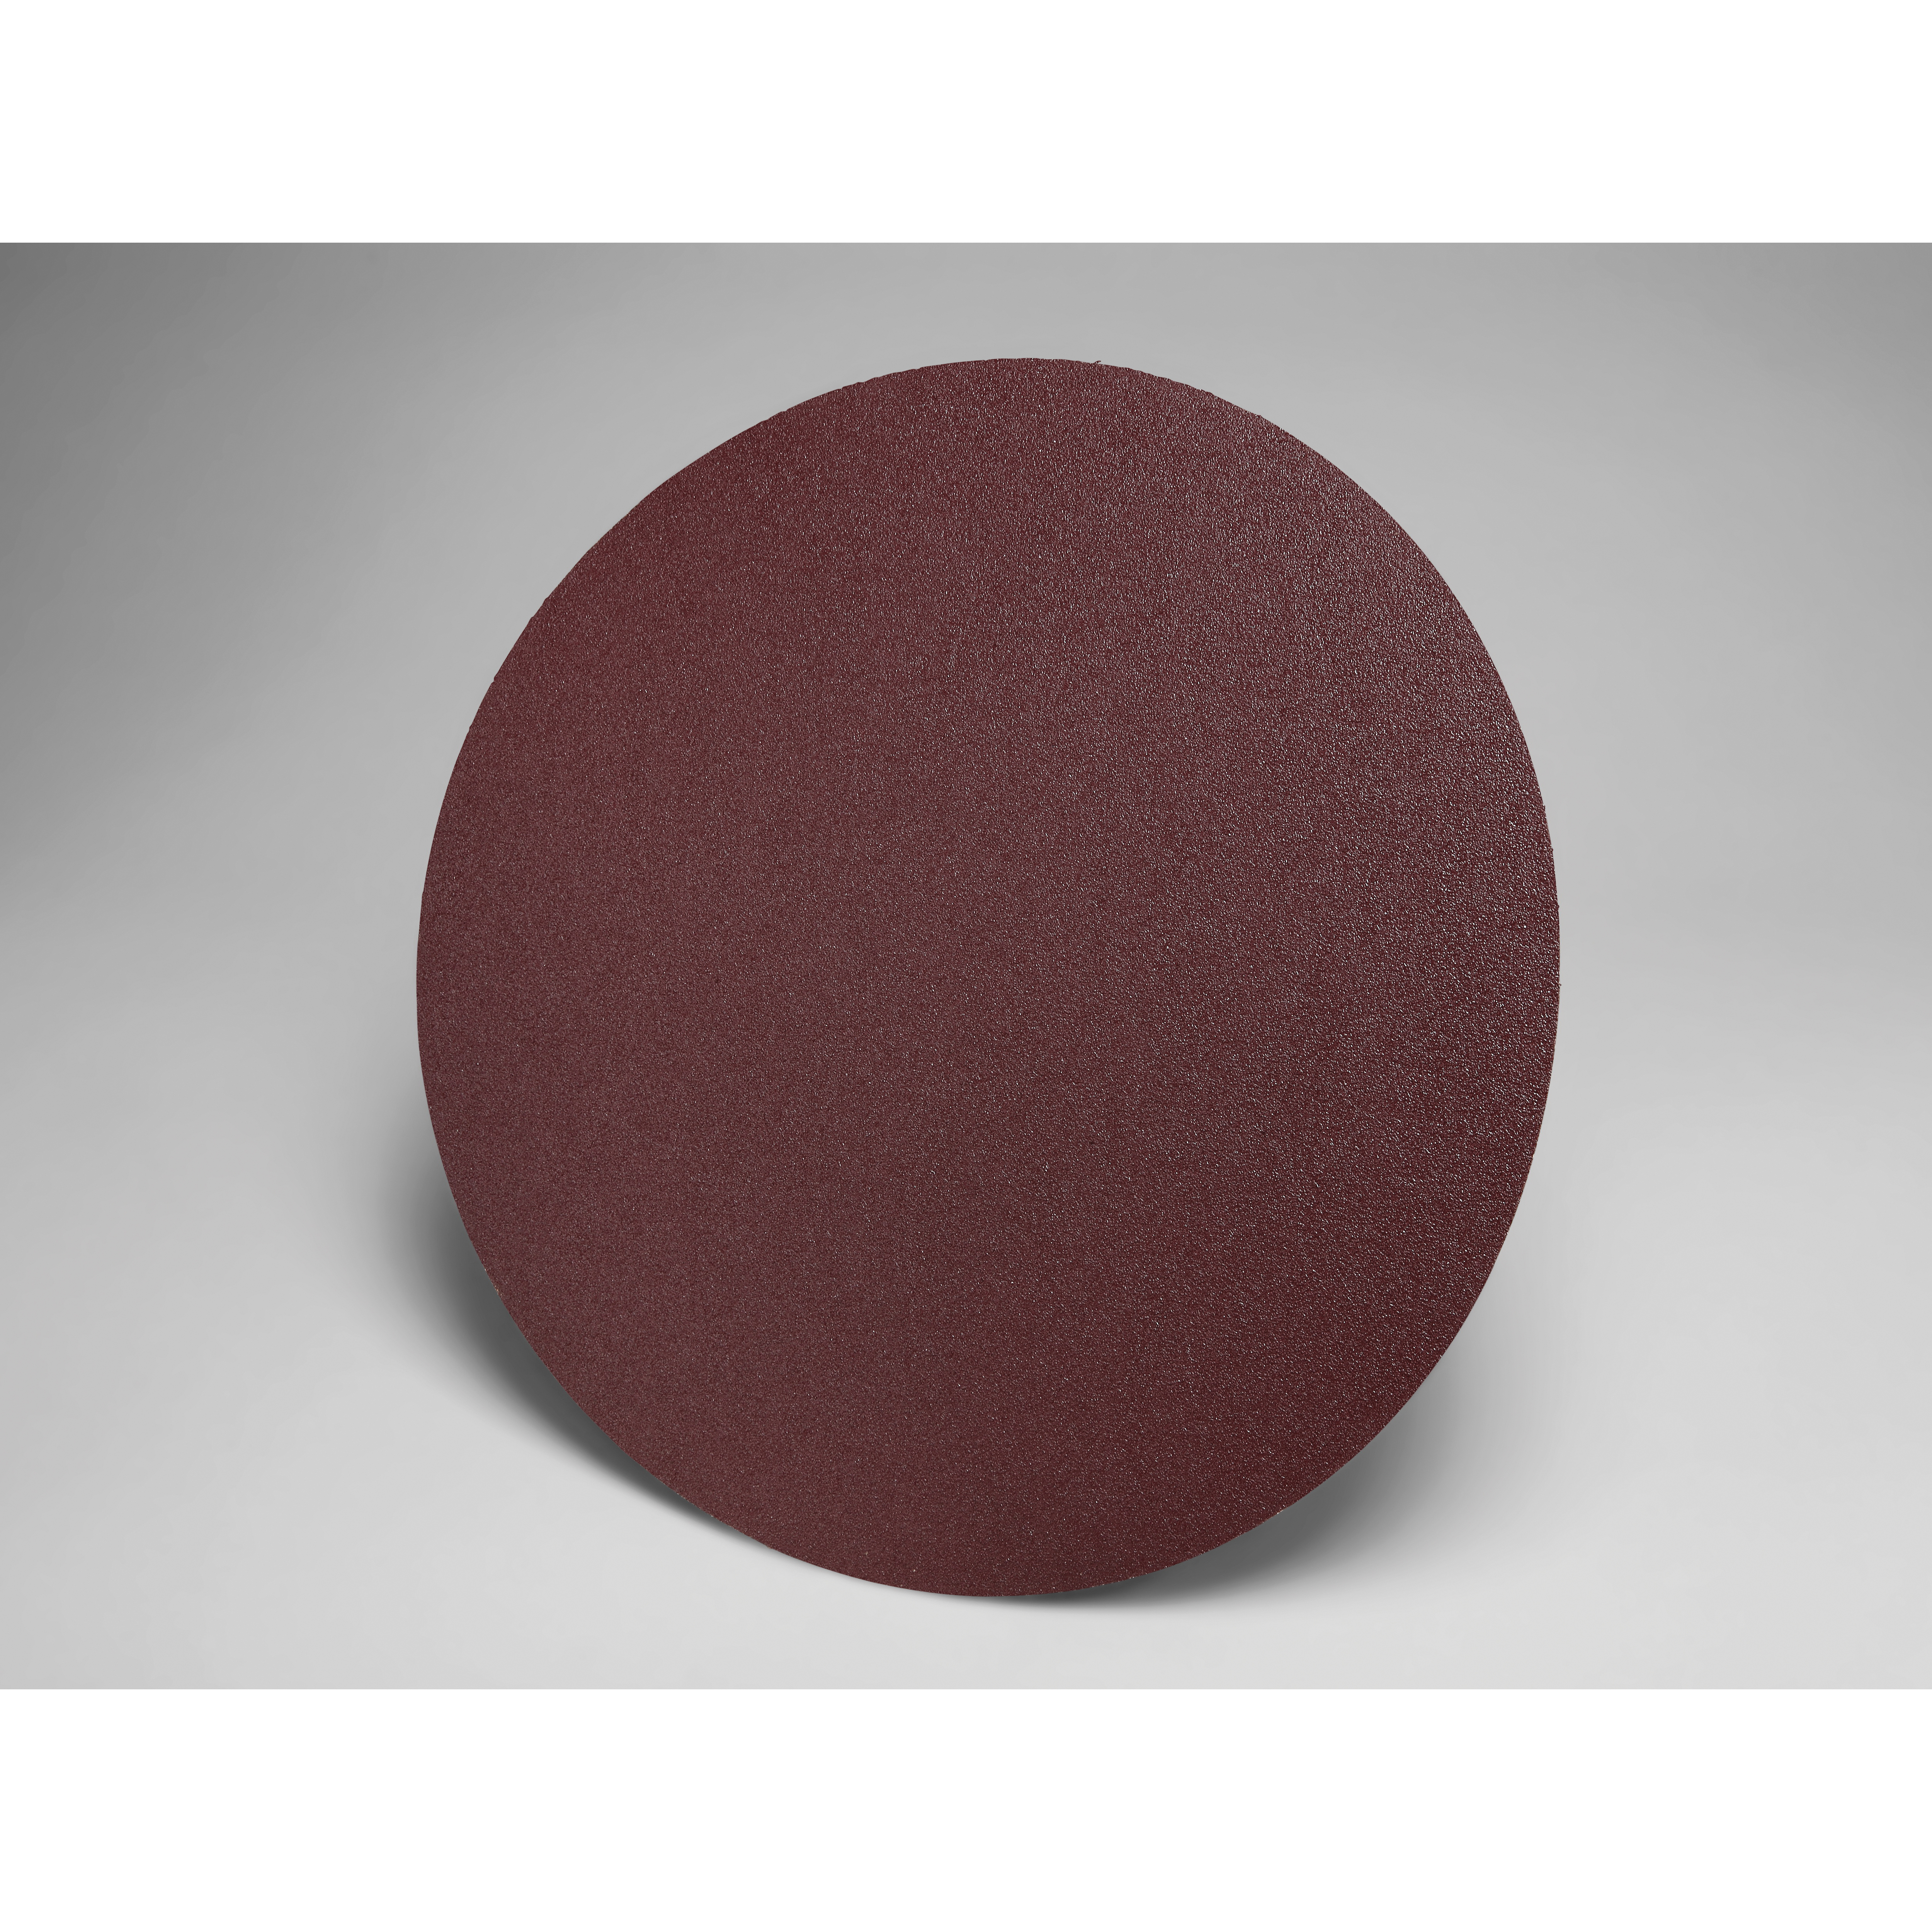 3M™ 051144-88900 348D Heavy Duty PSA Cylindrical Wheel, 12 in Dia Disc, P150 Grit, Very Fine Grade, Aluminum Oxide Abrasive, Cloth Backing